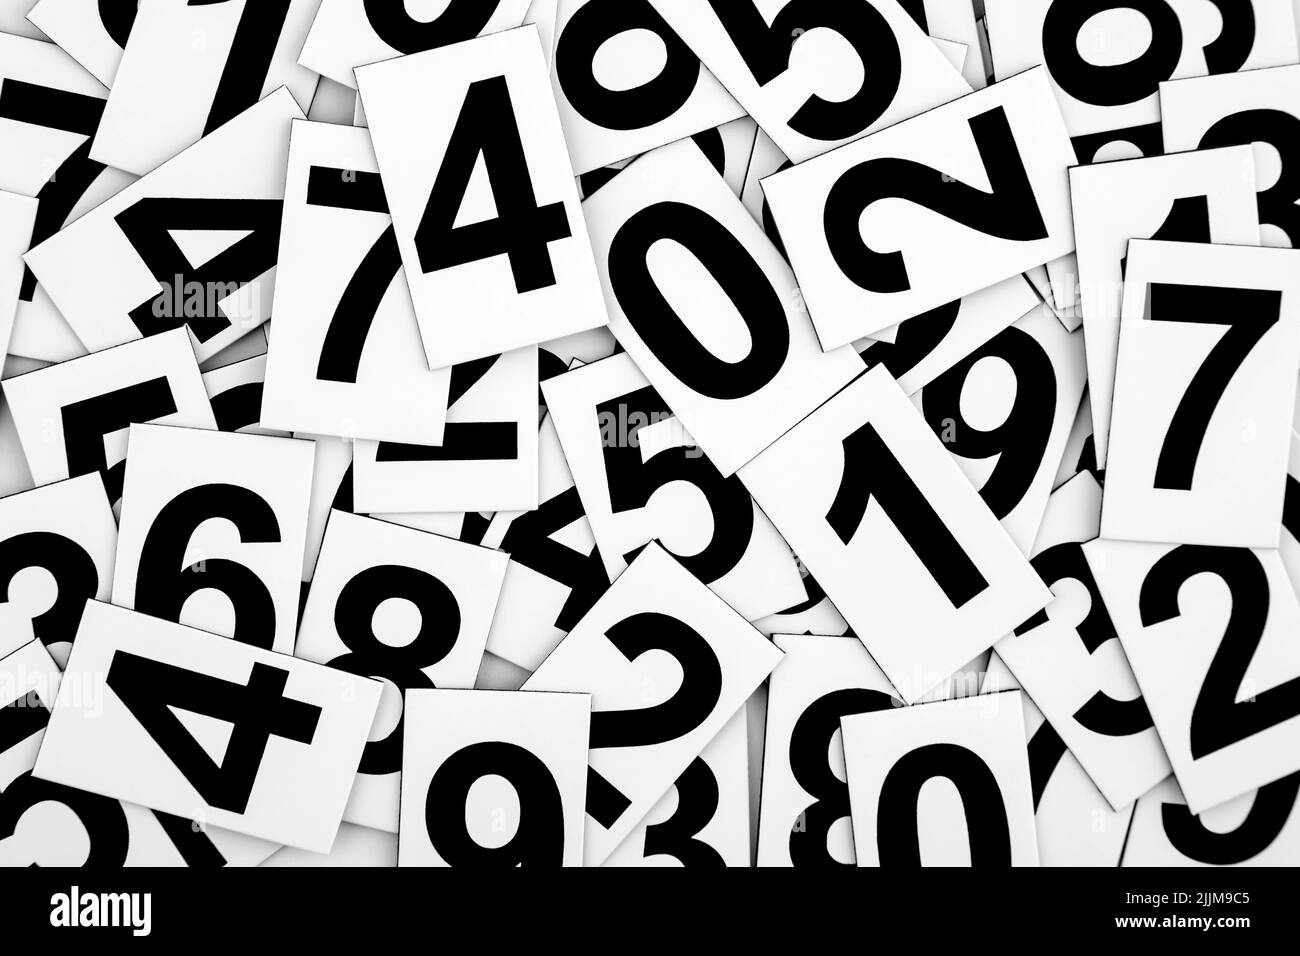 Abstract background with random numbers. Typography background composition. Stock Photo